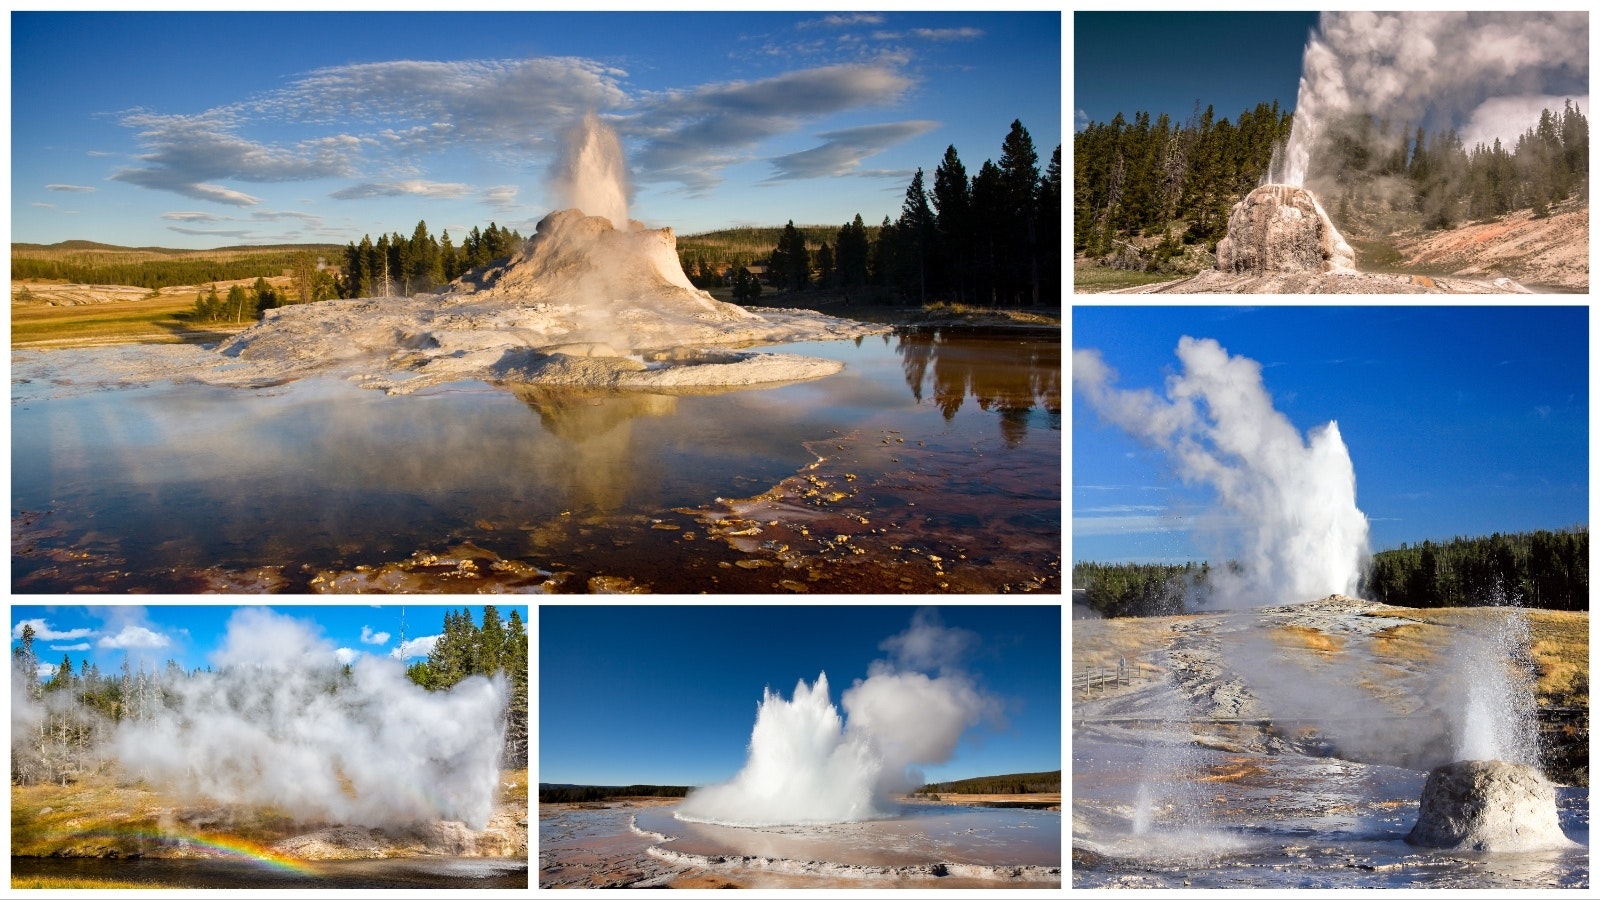 Geysers composite